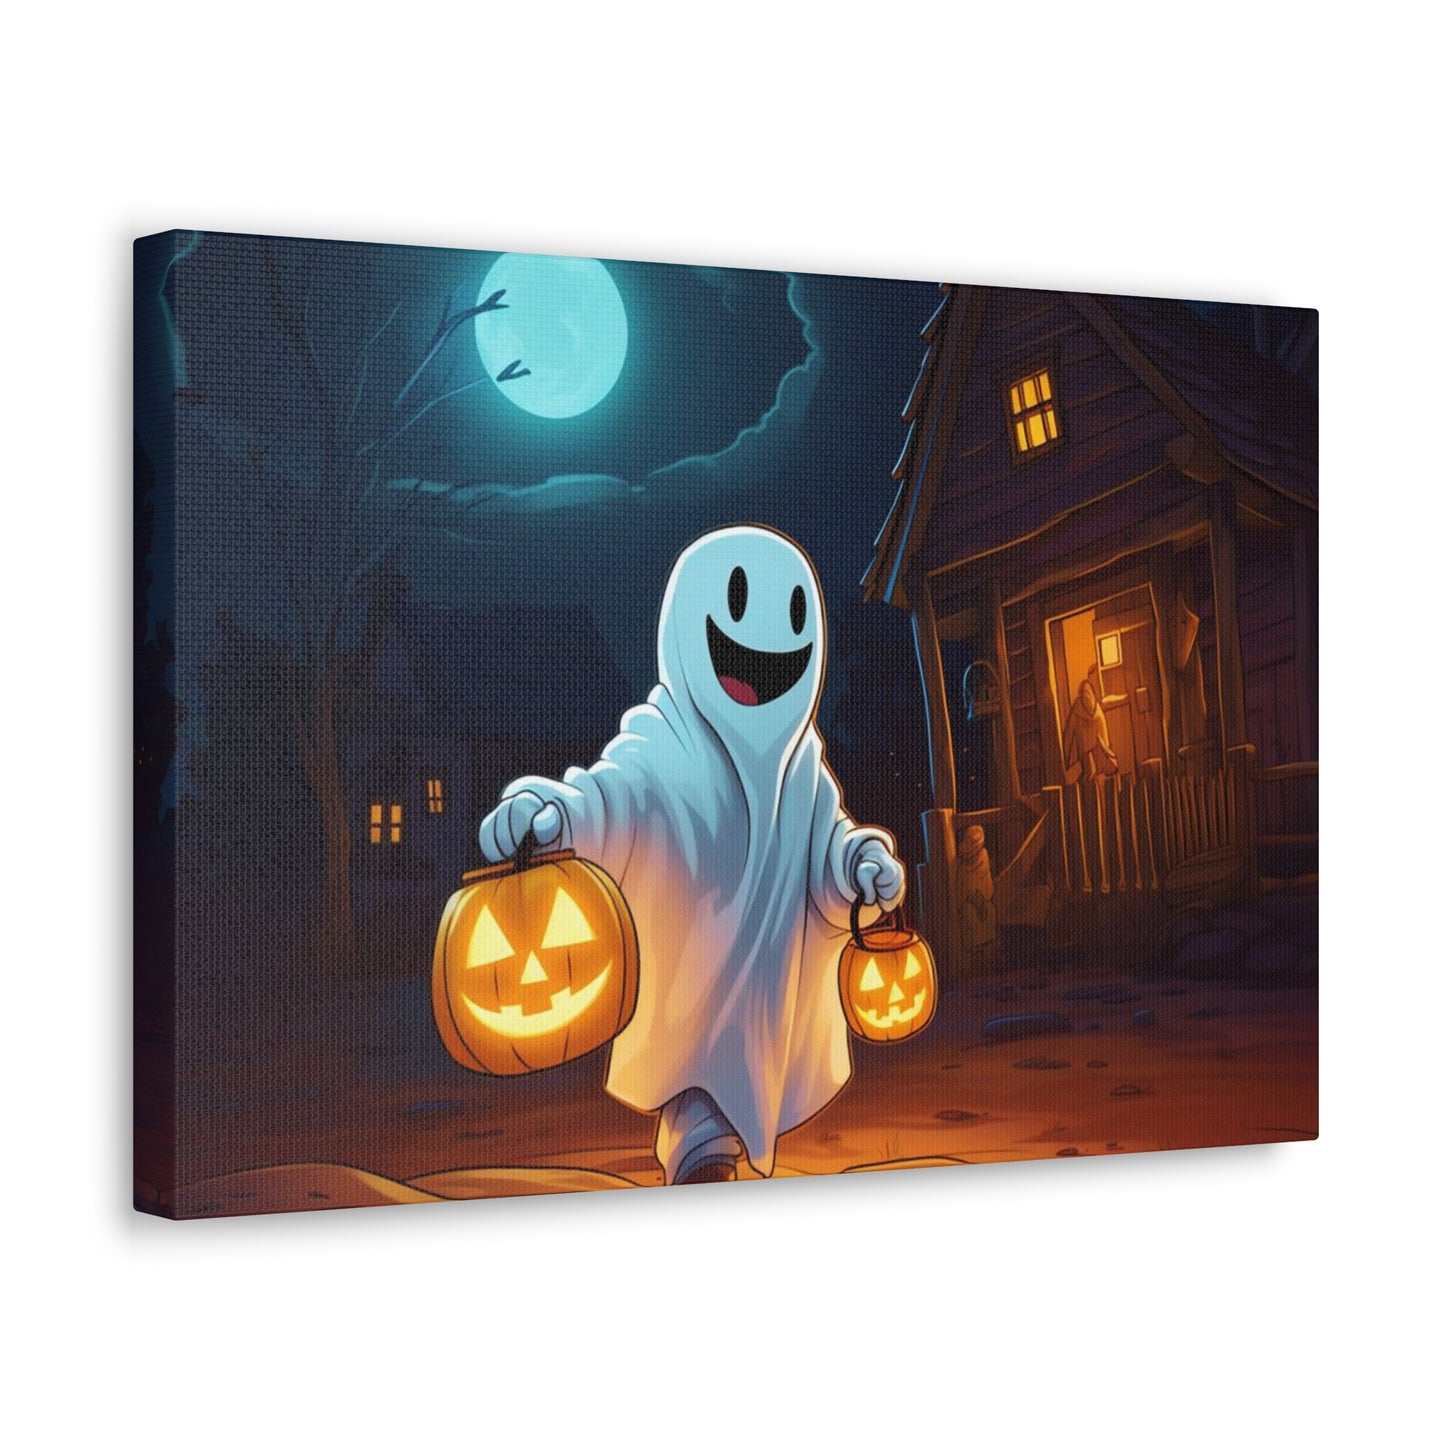 Scary Trick-or-Treater Canvas Print Halloween Wall Art Decor Gifts